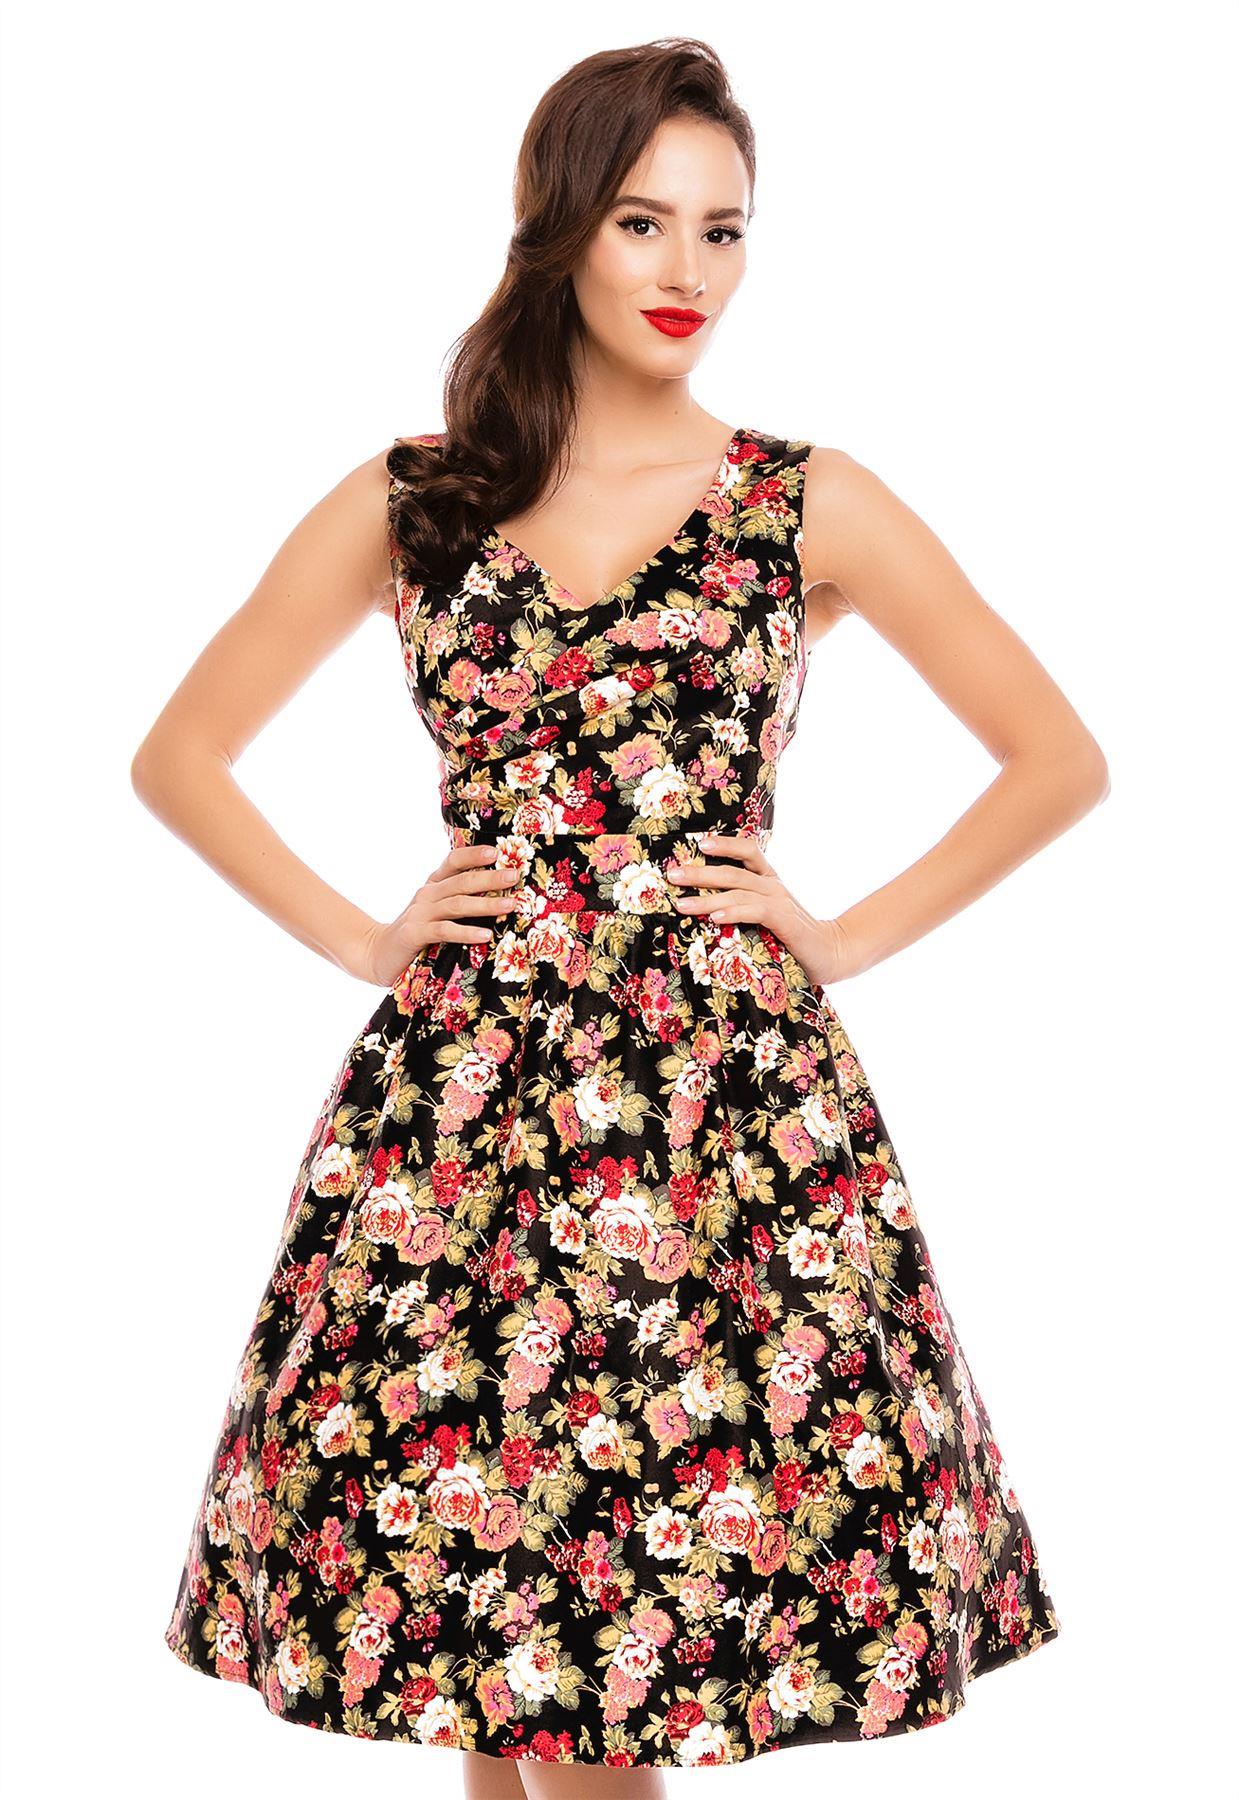 Model wearing our crossover bust May dress, in black/pink floral print, close up view